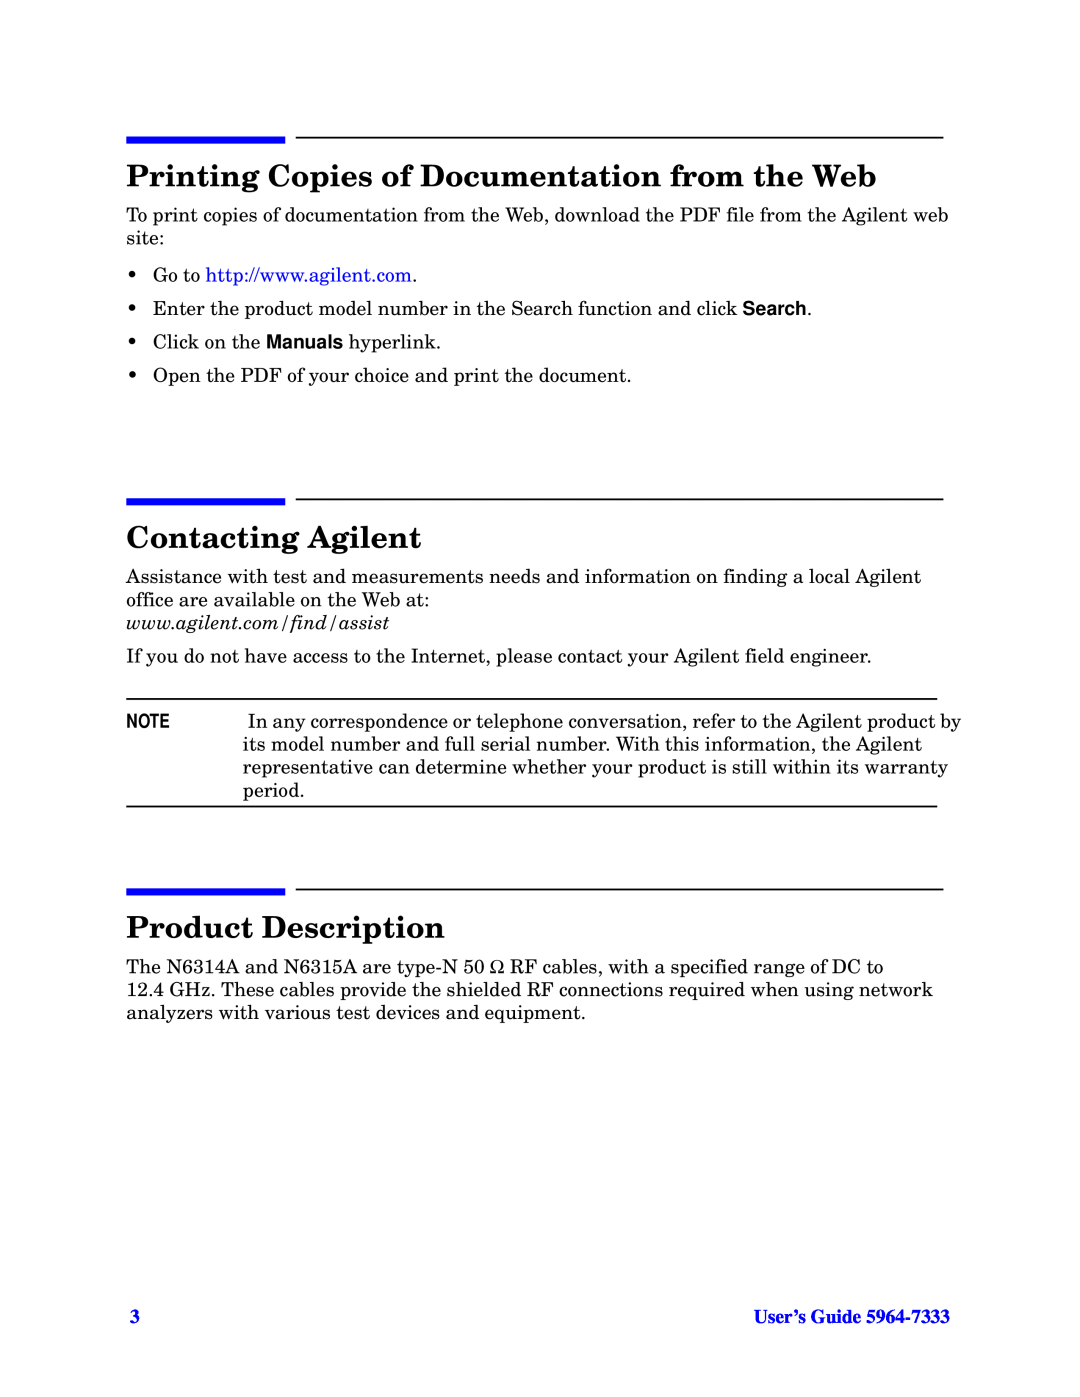 Agilent Technologies N6314A, N6315A Printing Copies of Documentation from the Web, Contacting Agilent, Product Description 